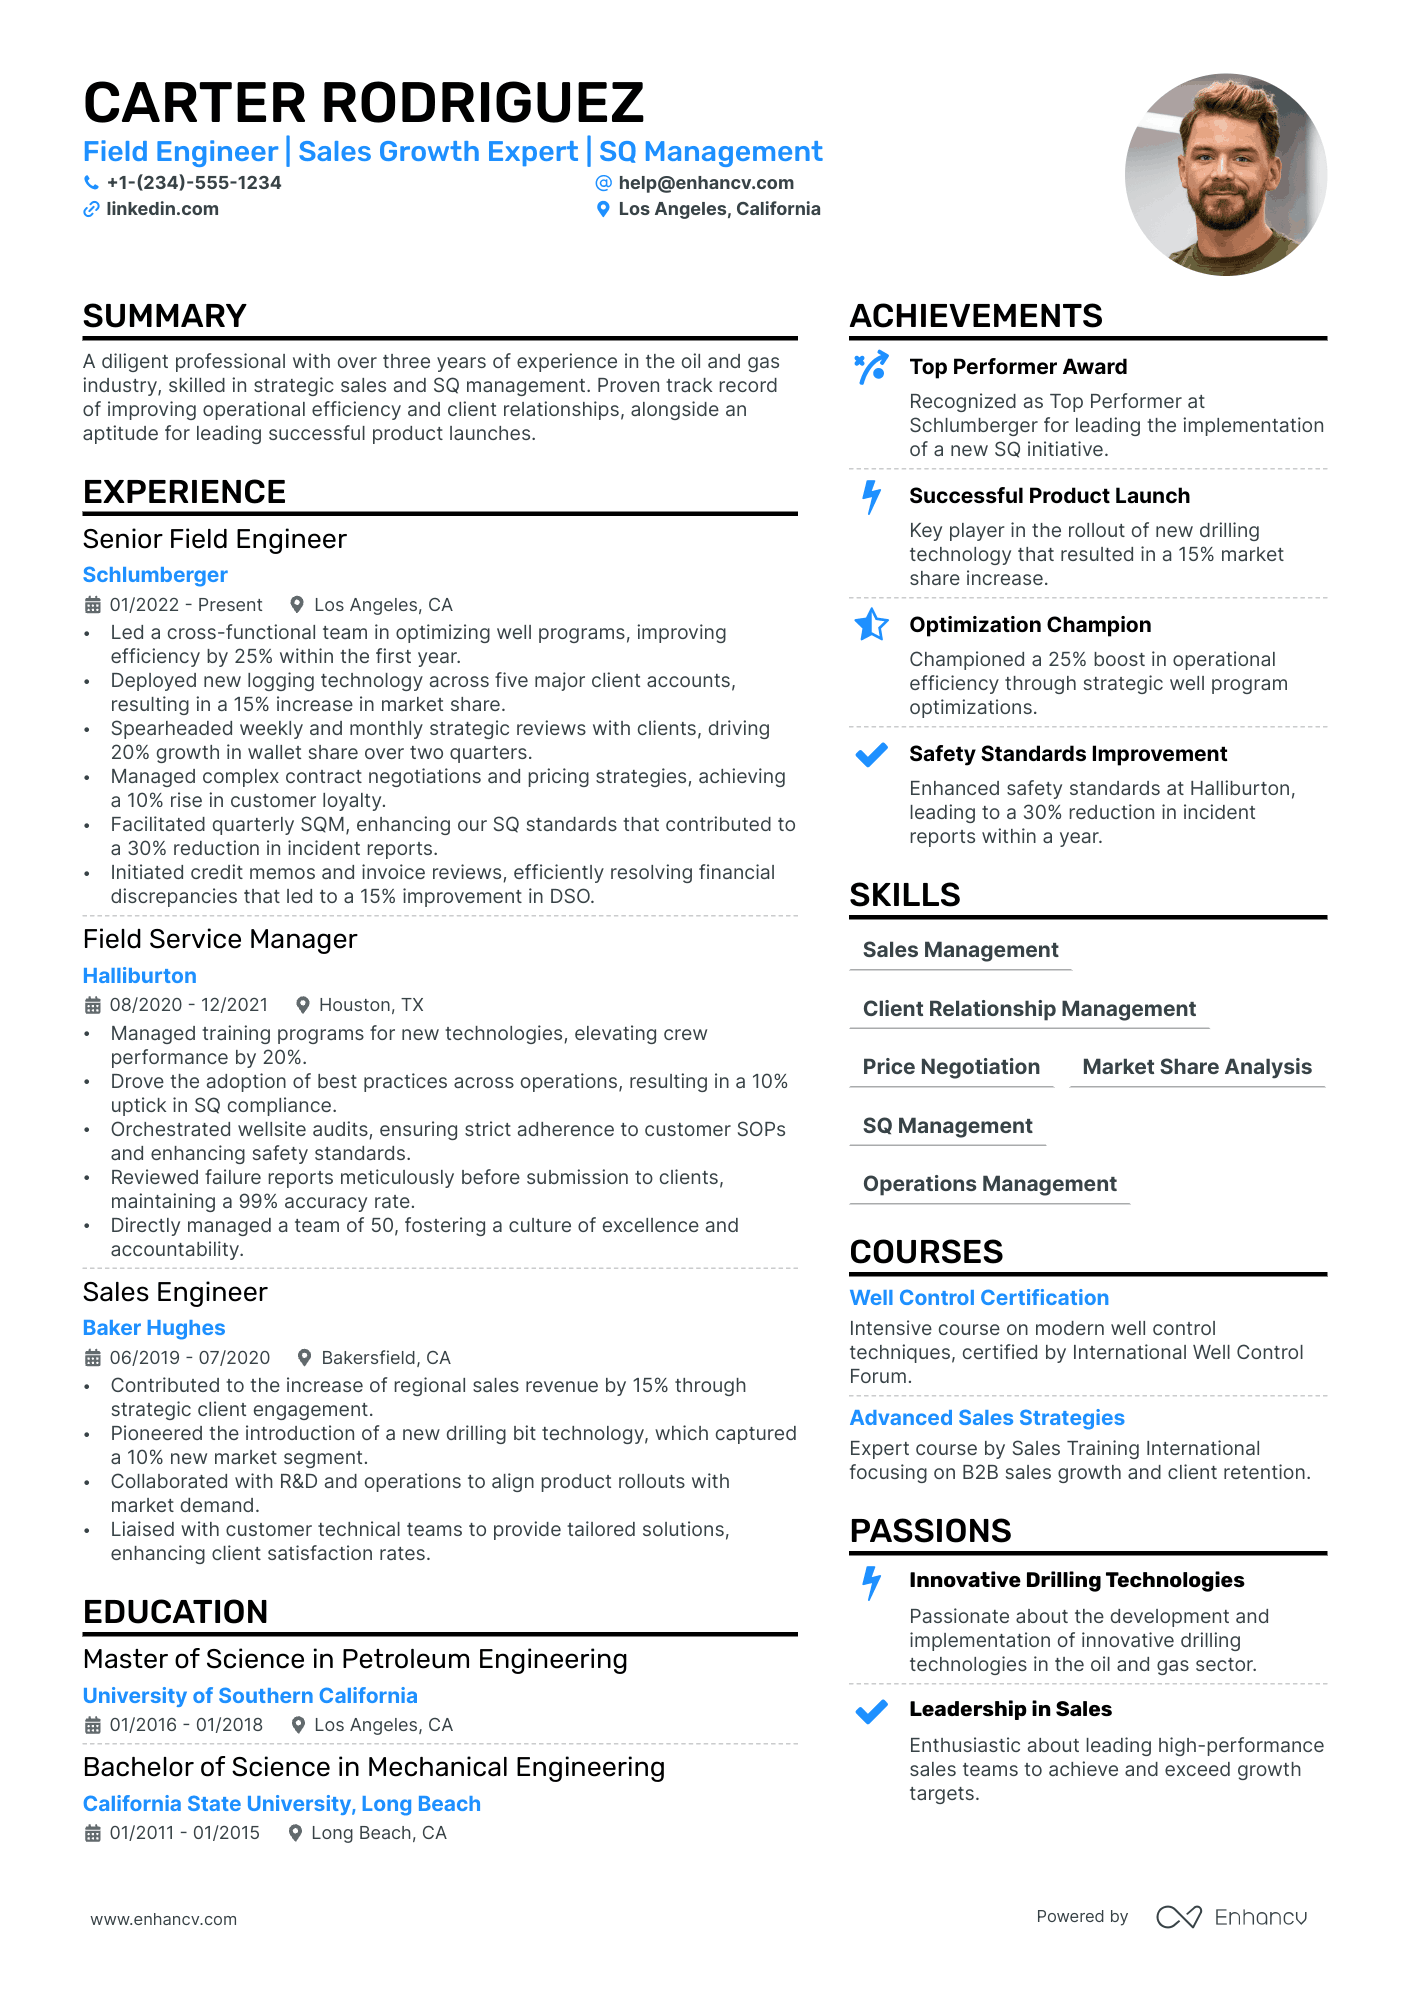 Customer Support Manager resume example